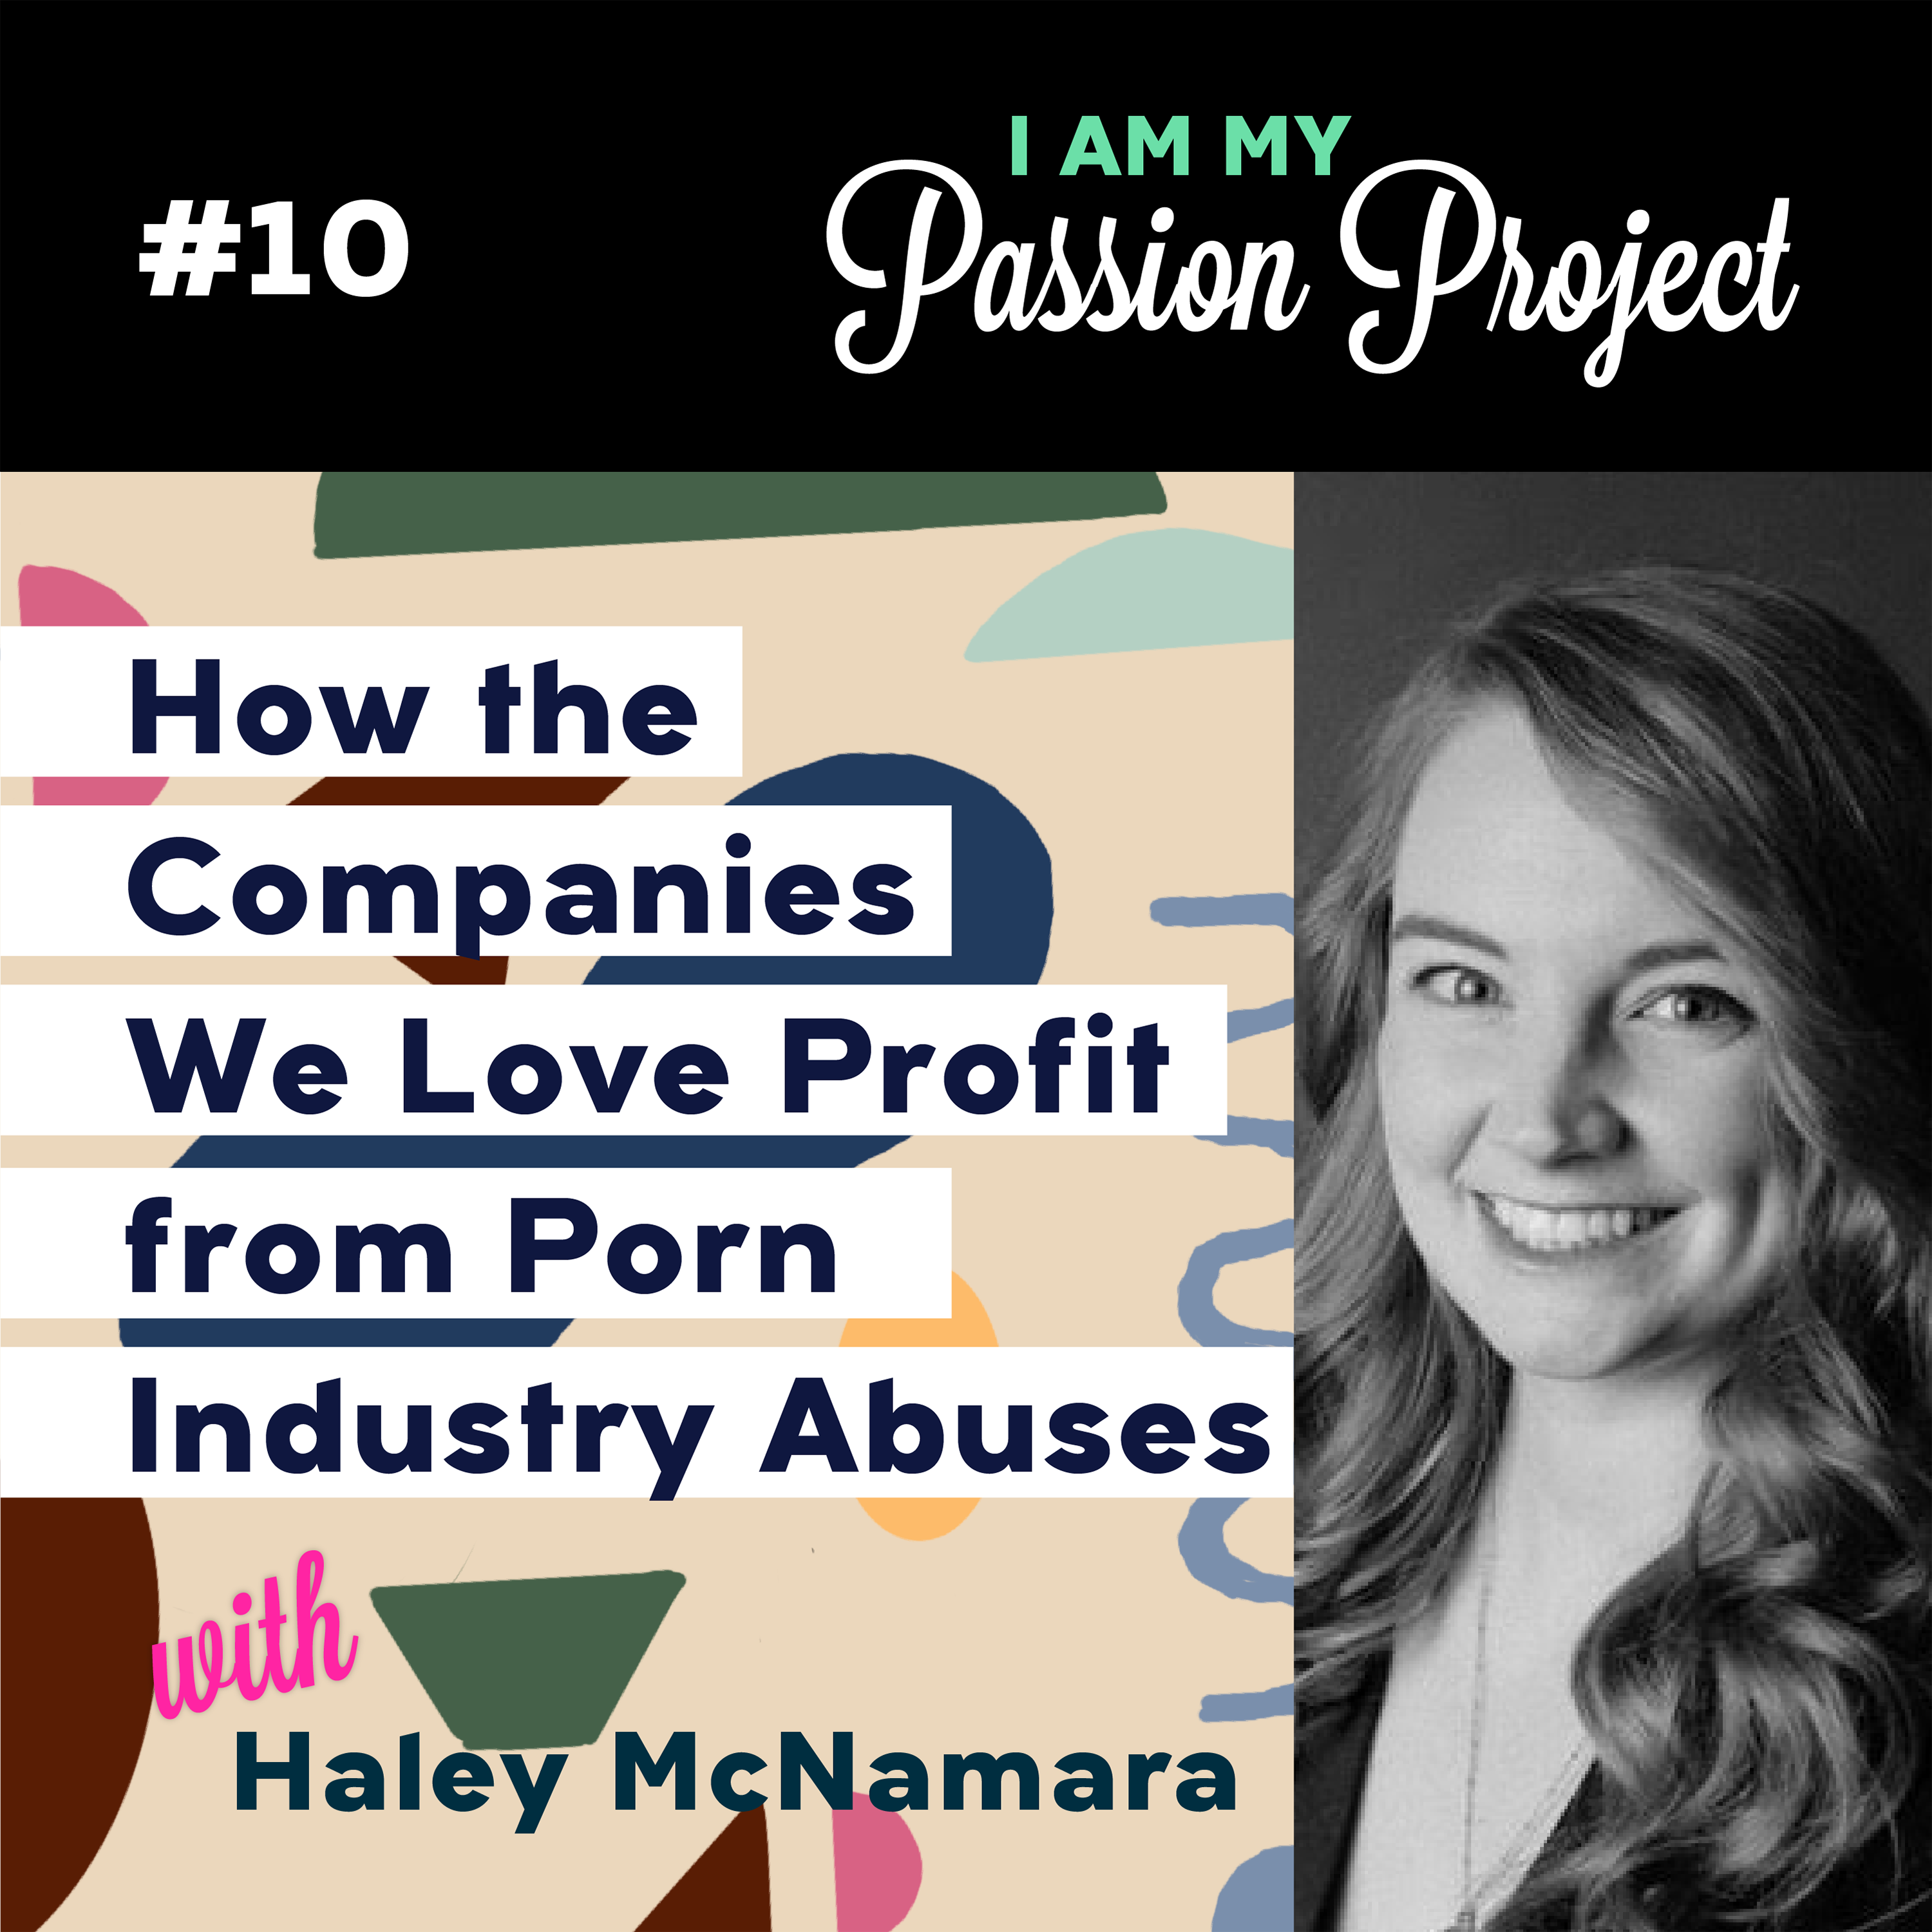 How the Companies We Love Profit from Porn Industry Abuses